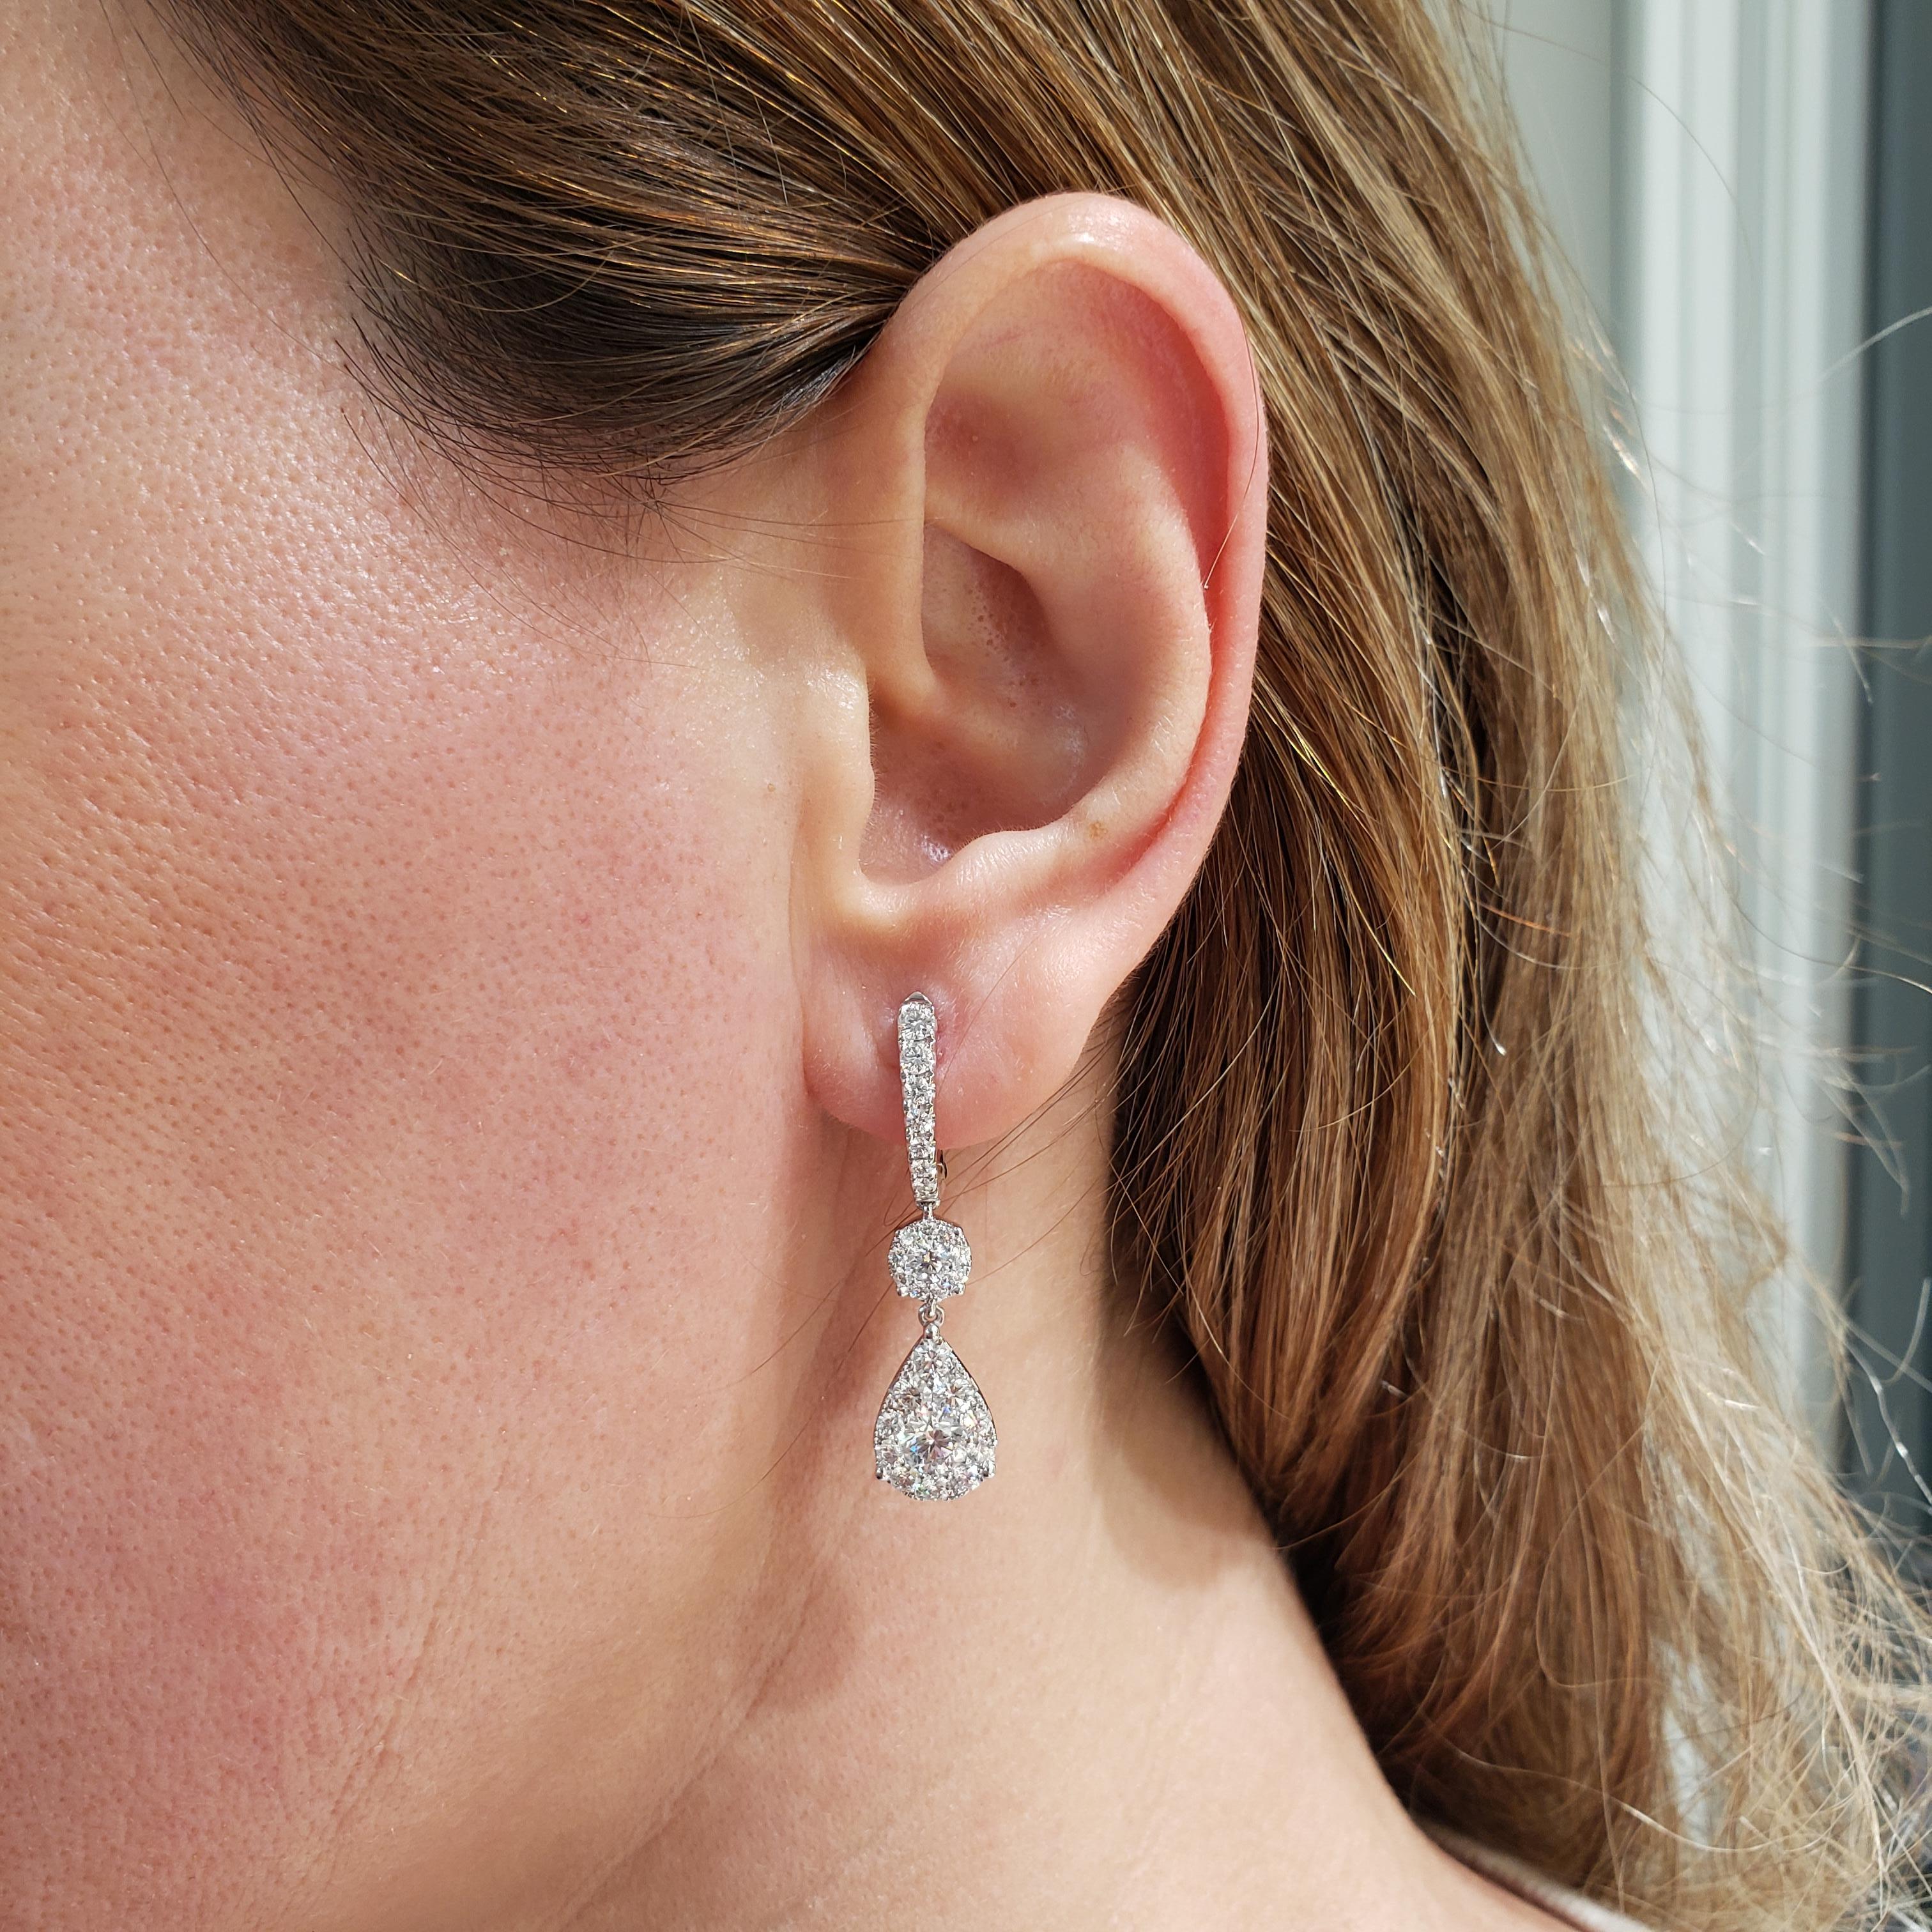 A stylish pair of earrings. Each earring showcases a GIA certified round diamond, set in a pear-shaped diamond halo. Suspended on a diamond halo and an accented diamond hoop. Diamonds weigh 2.85 carats total. GIA certified the center diamonds as